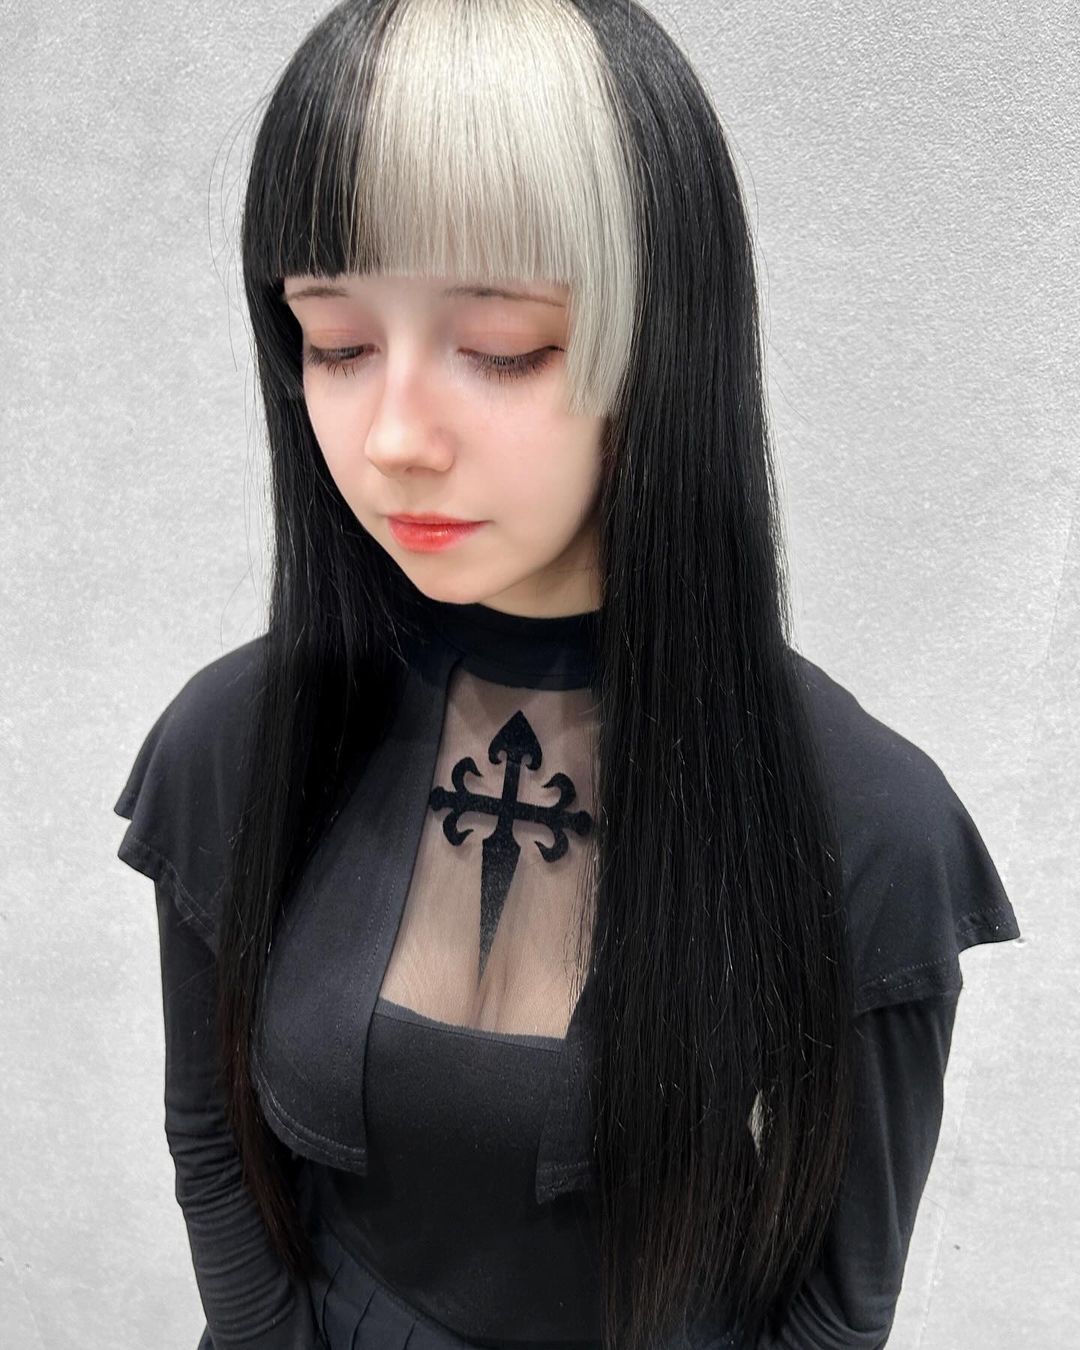 Hime cut and black and white bangs